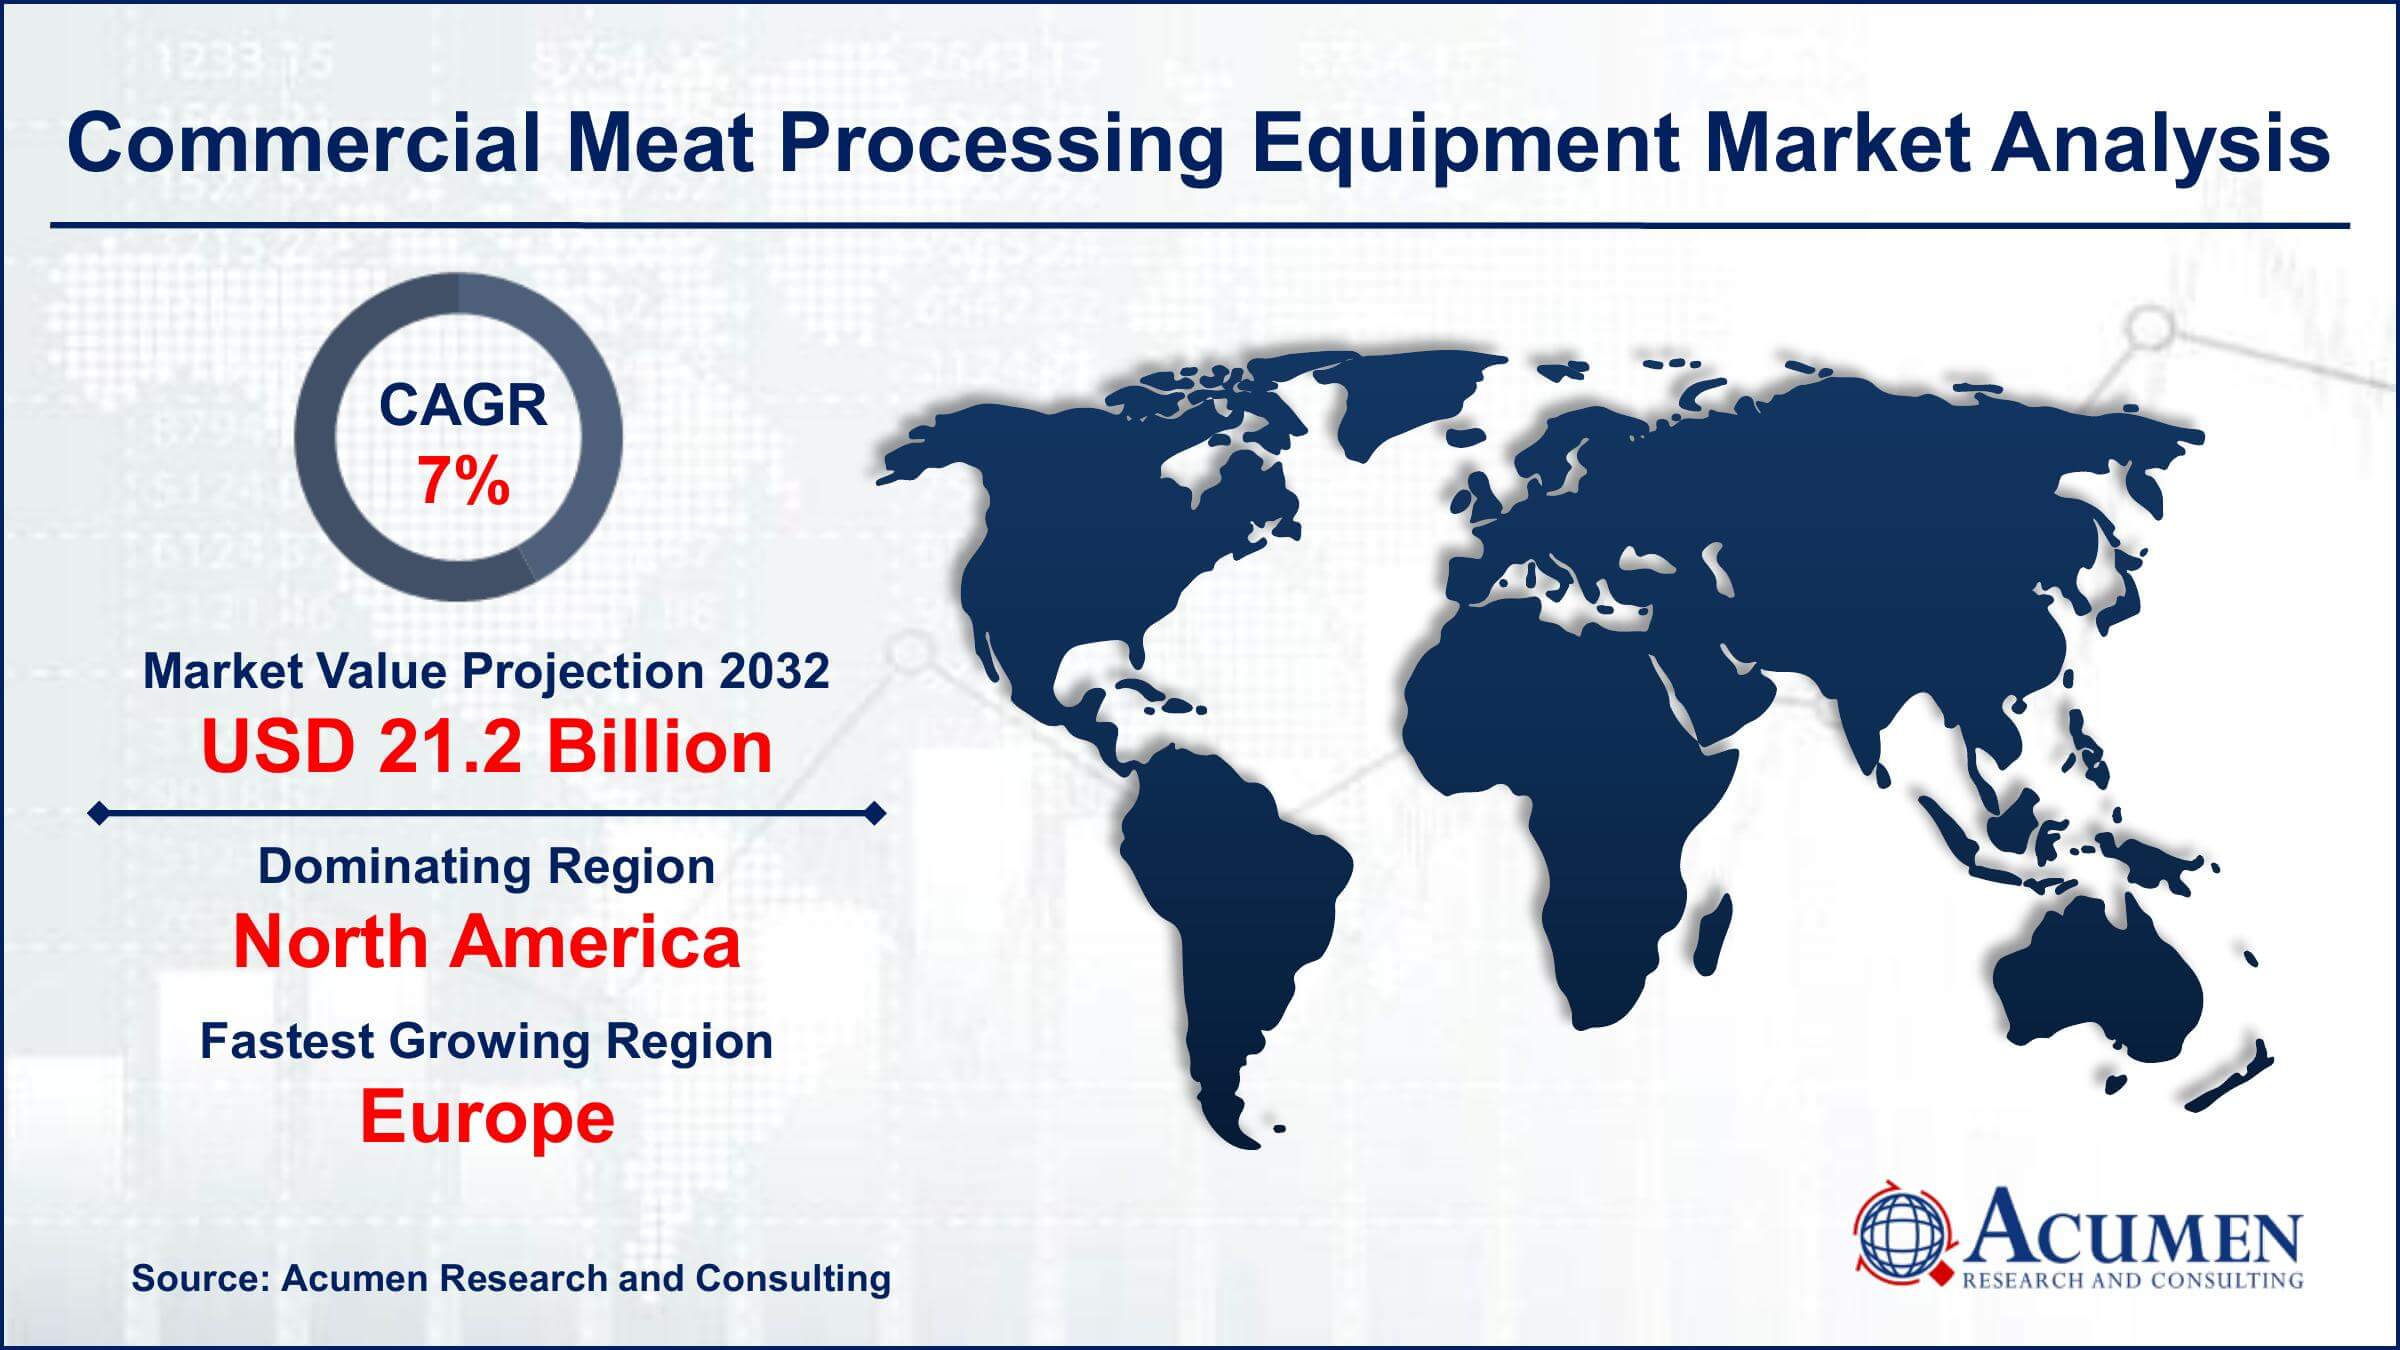 https://www.acumenresearchandconsulting.com/reportimages/Infography-2_Global-Commercial-Meat-Processing-Equipment-Market-02.jpg